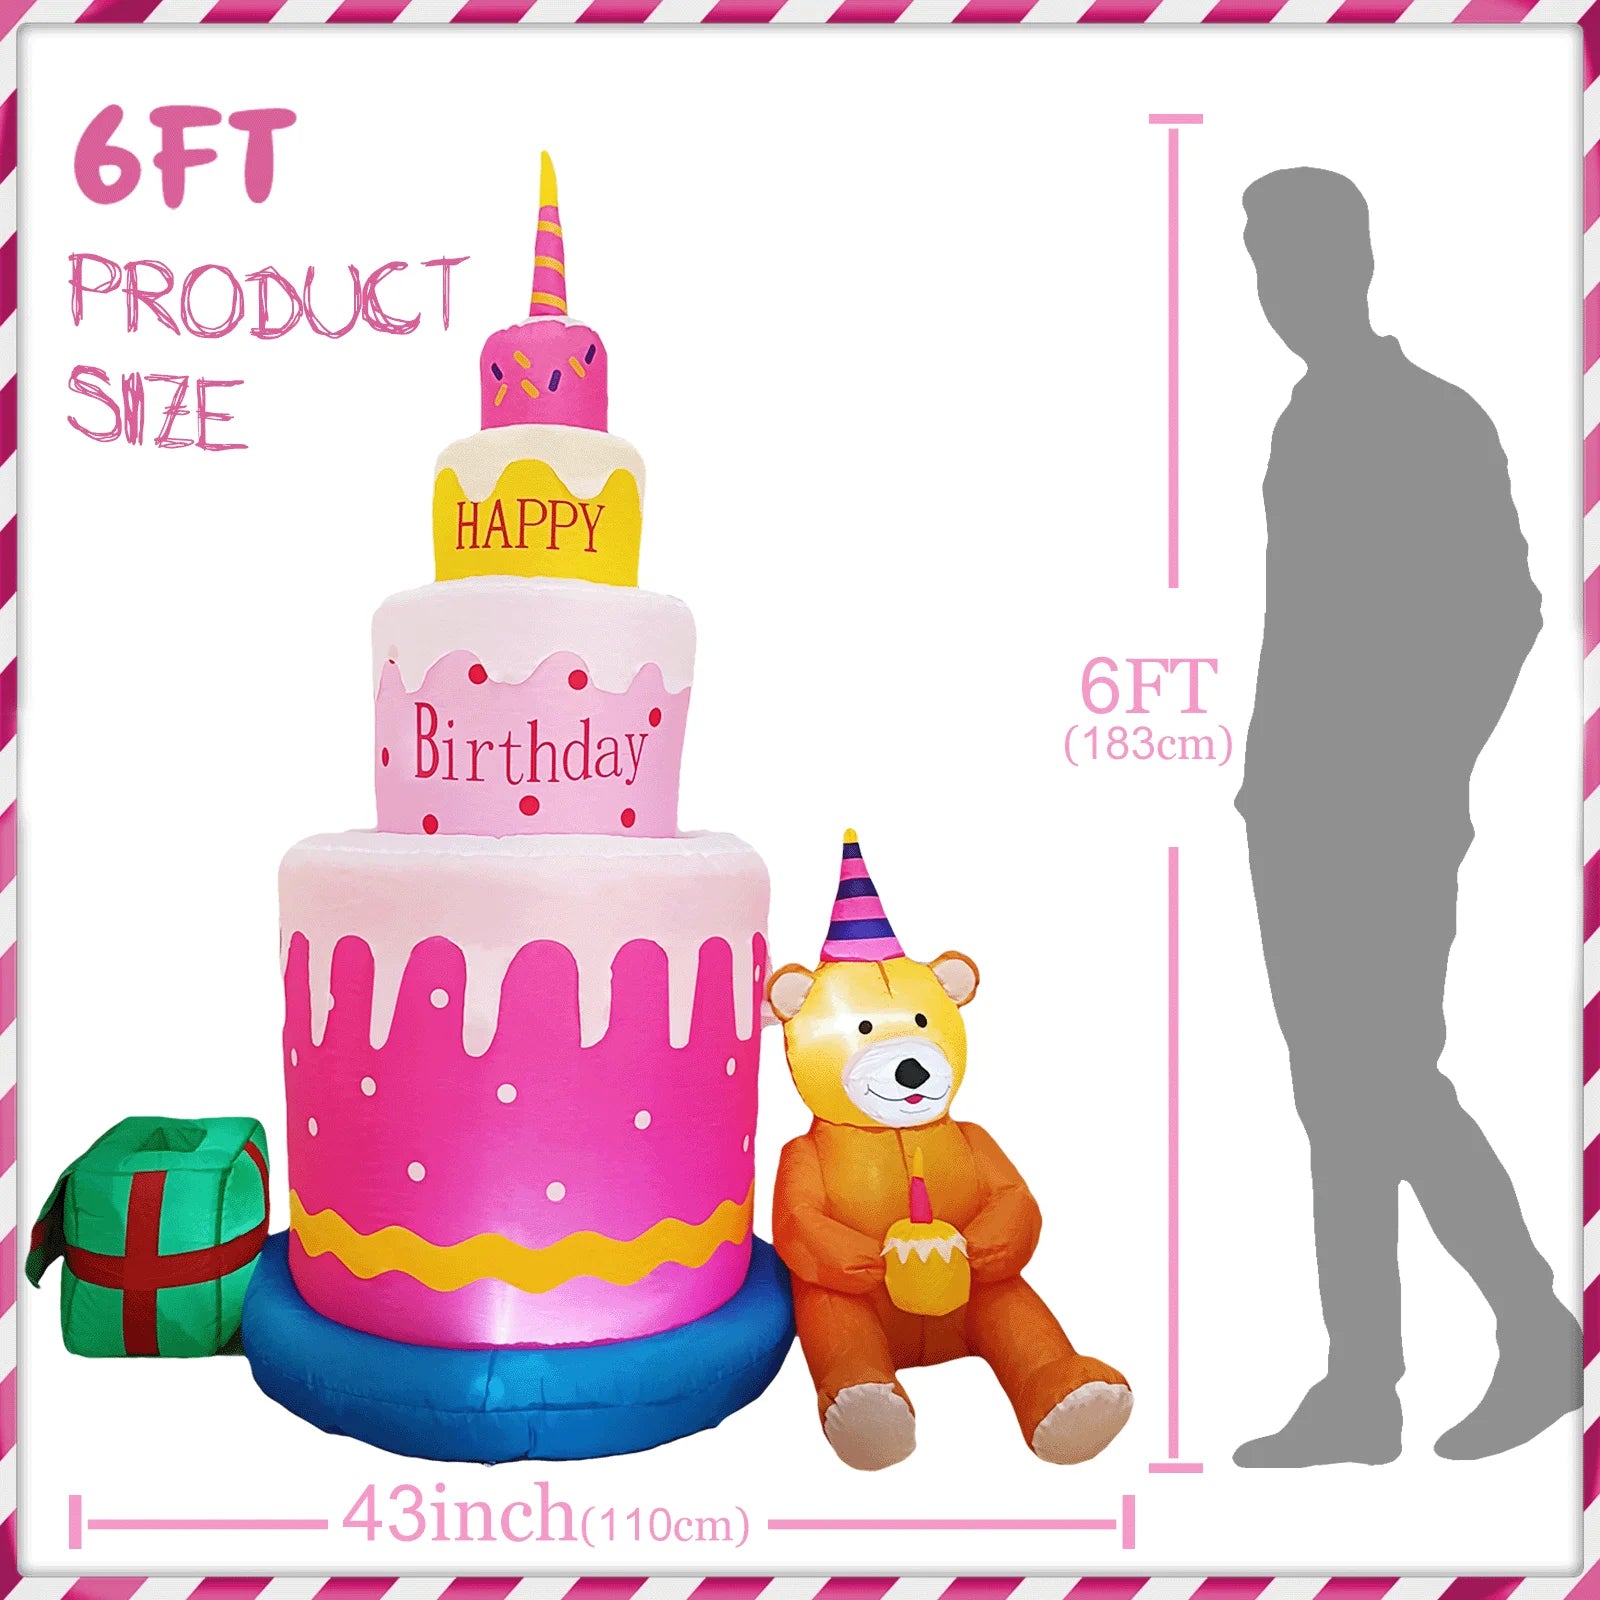 6FT Blow up Birthday Cake Happy Birthday Inflatable Decorations with Teddy Bear Kids - ChildAngle